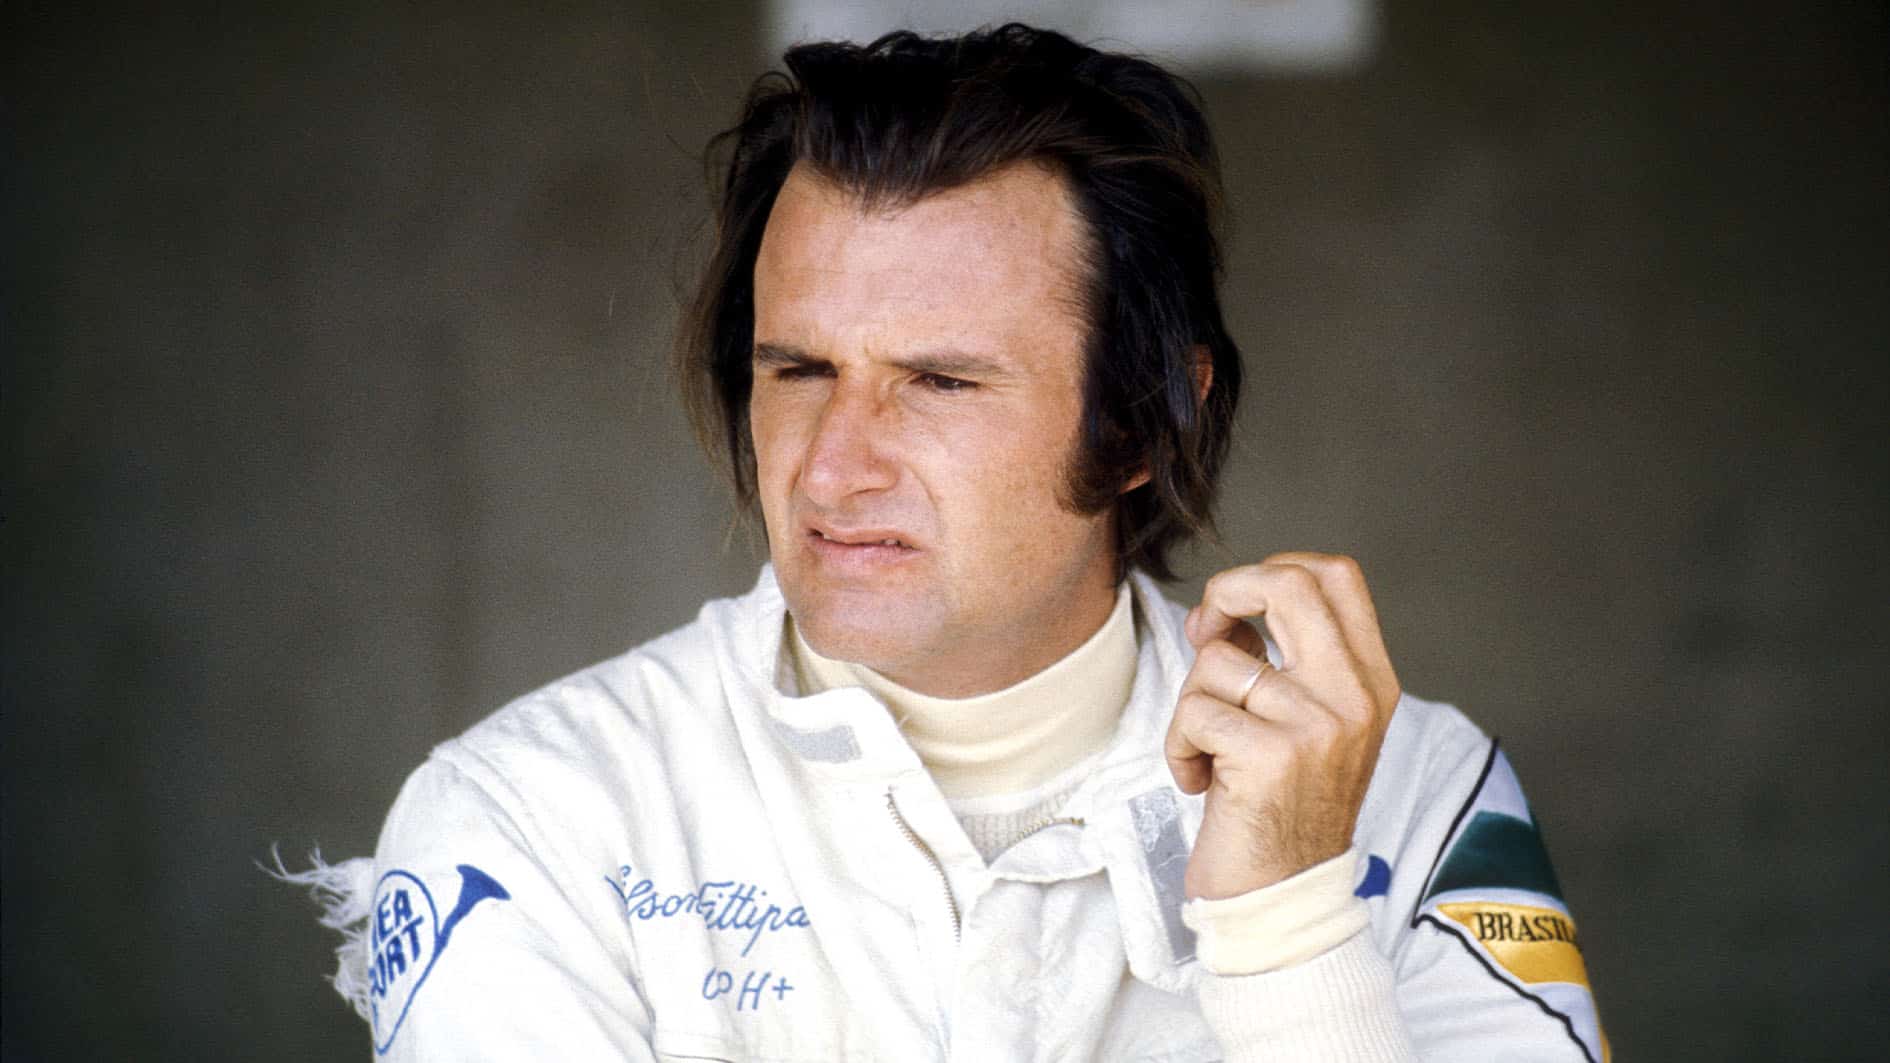 Top three in Championship still on for Fittipaldi after strong